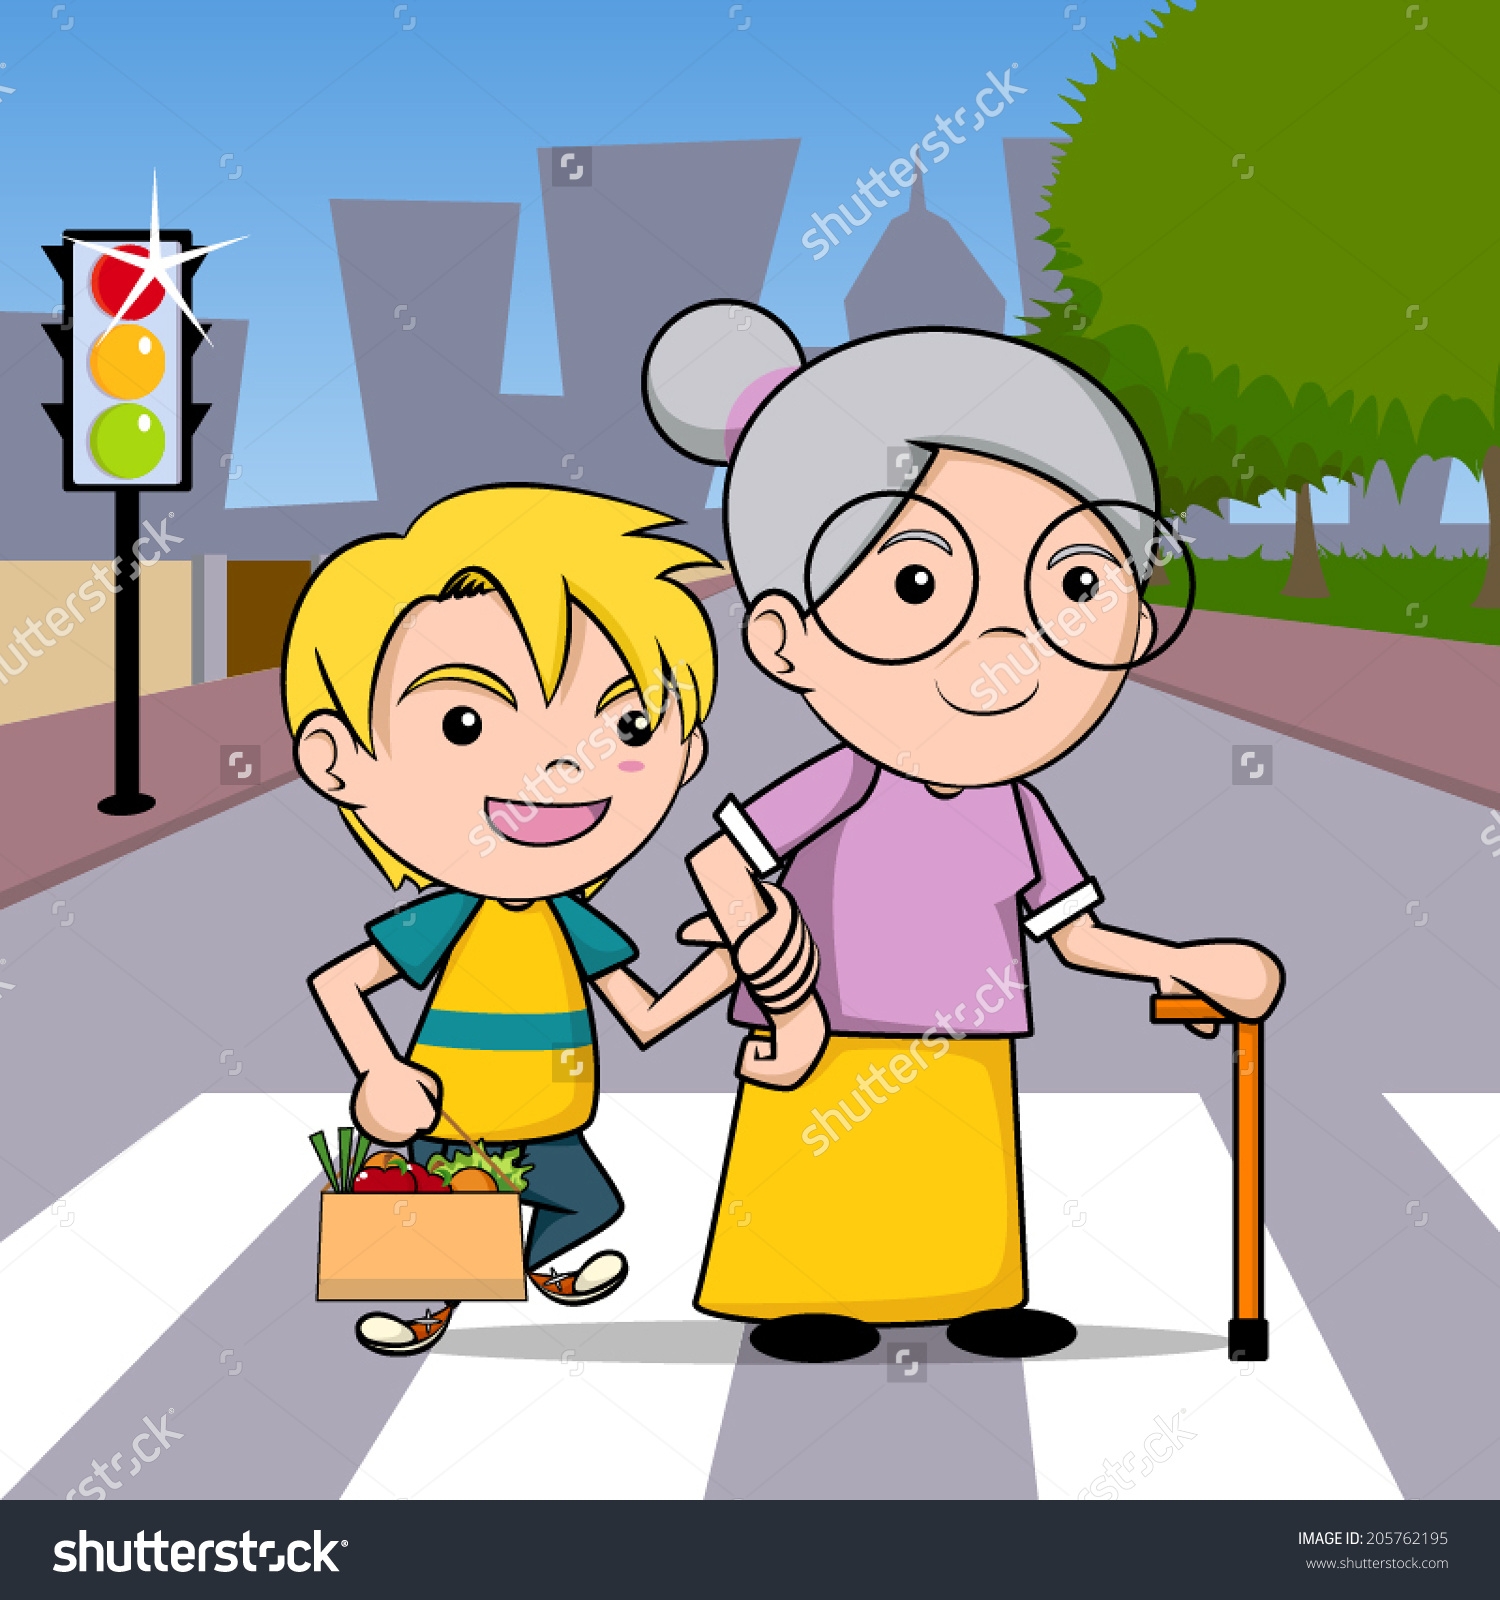 Boy Helping Others Clipart.